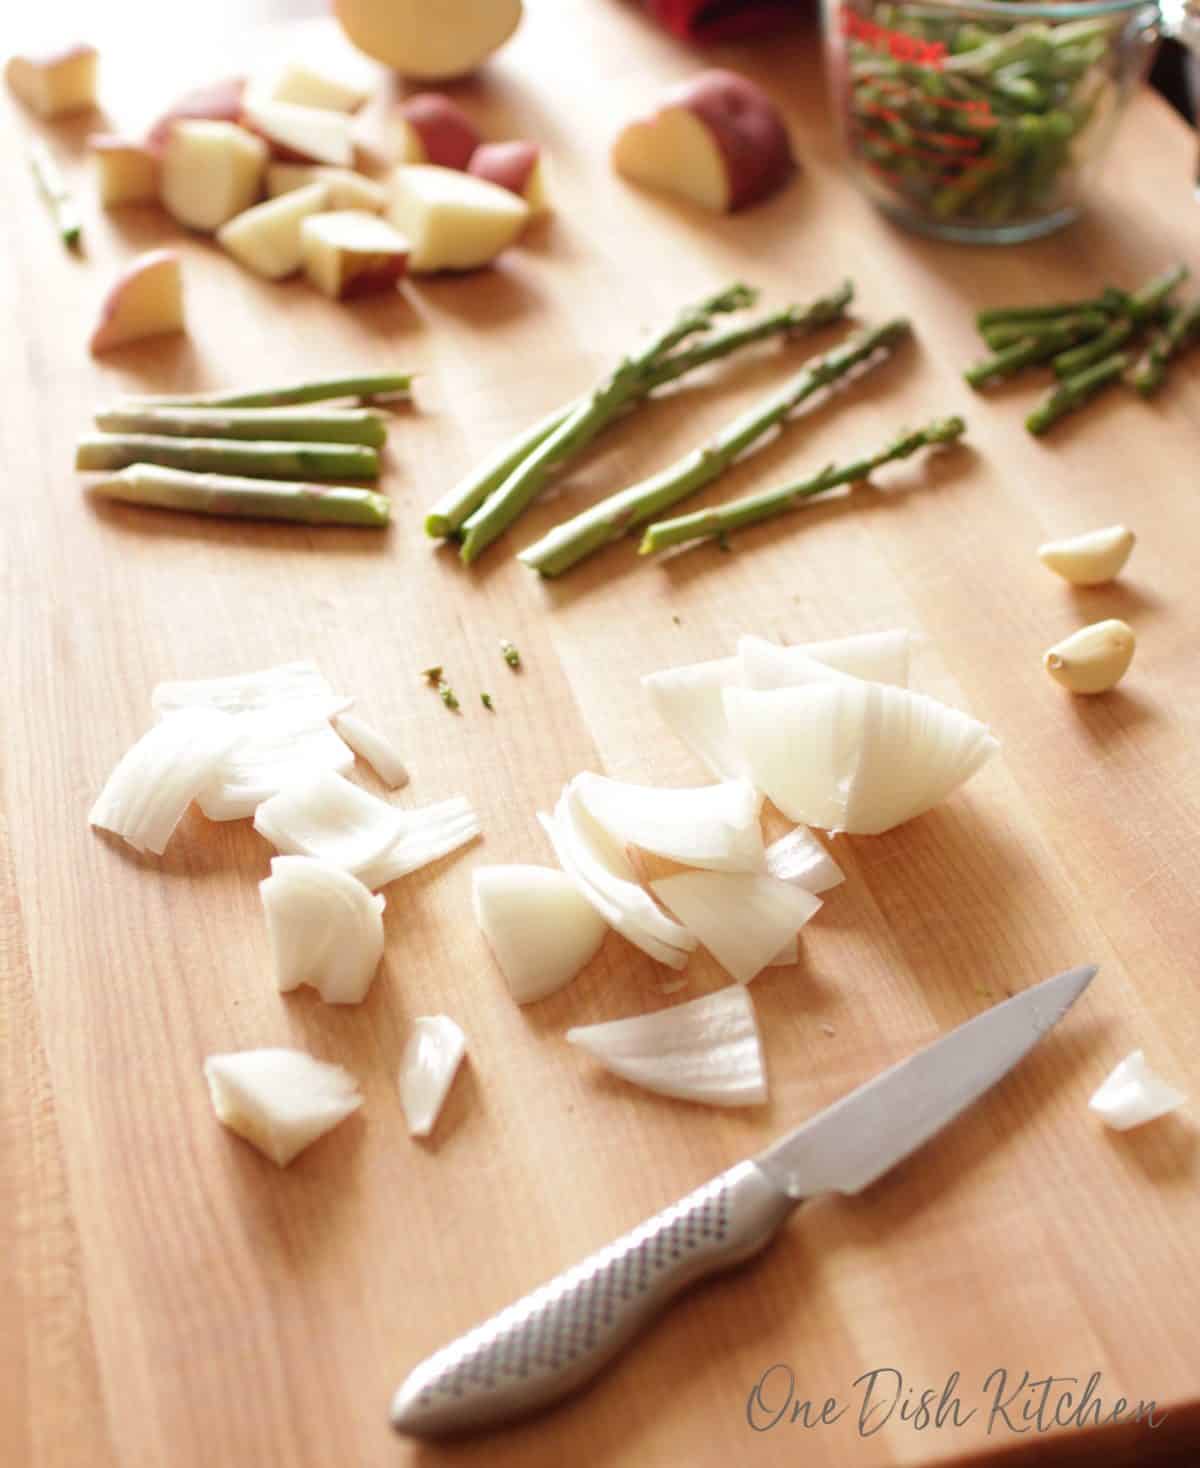 a cutting board with a small knife and cut asparagus, potatoes, and garlic scattered on the board.